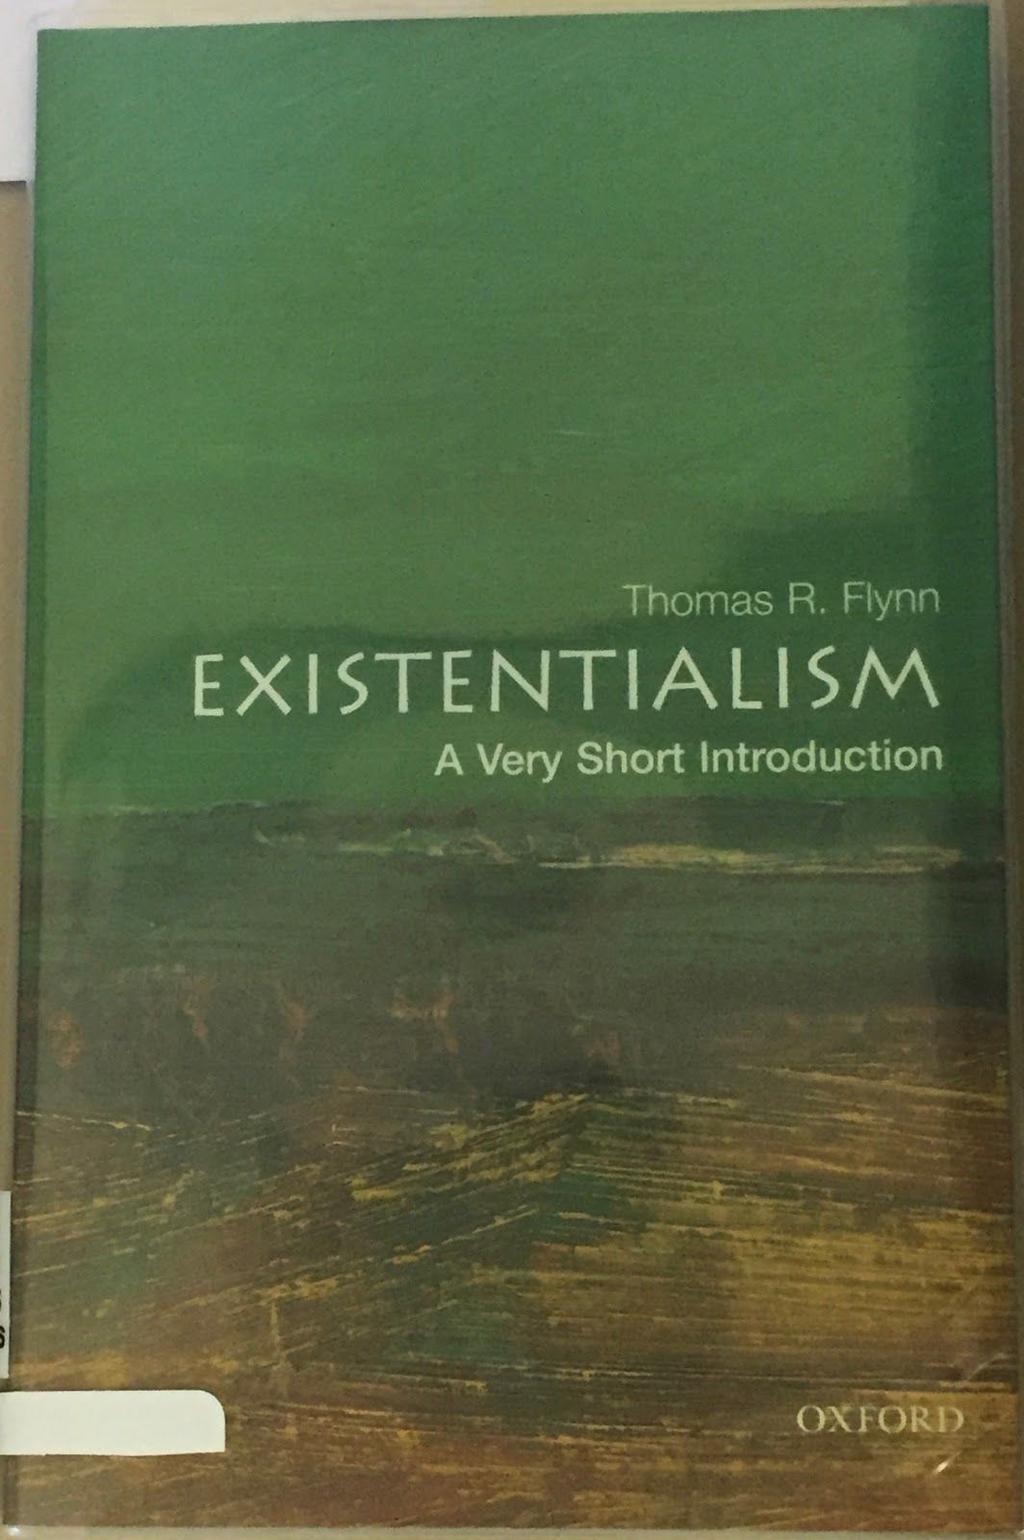 Aho draws on a wide range of existentialist thinkers in chapters centering on the key themes of freedom, being-in-the-world, alienation, nihilism, anxiety, and authenticity.